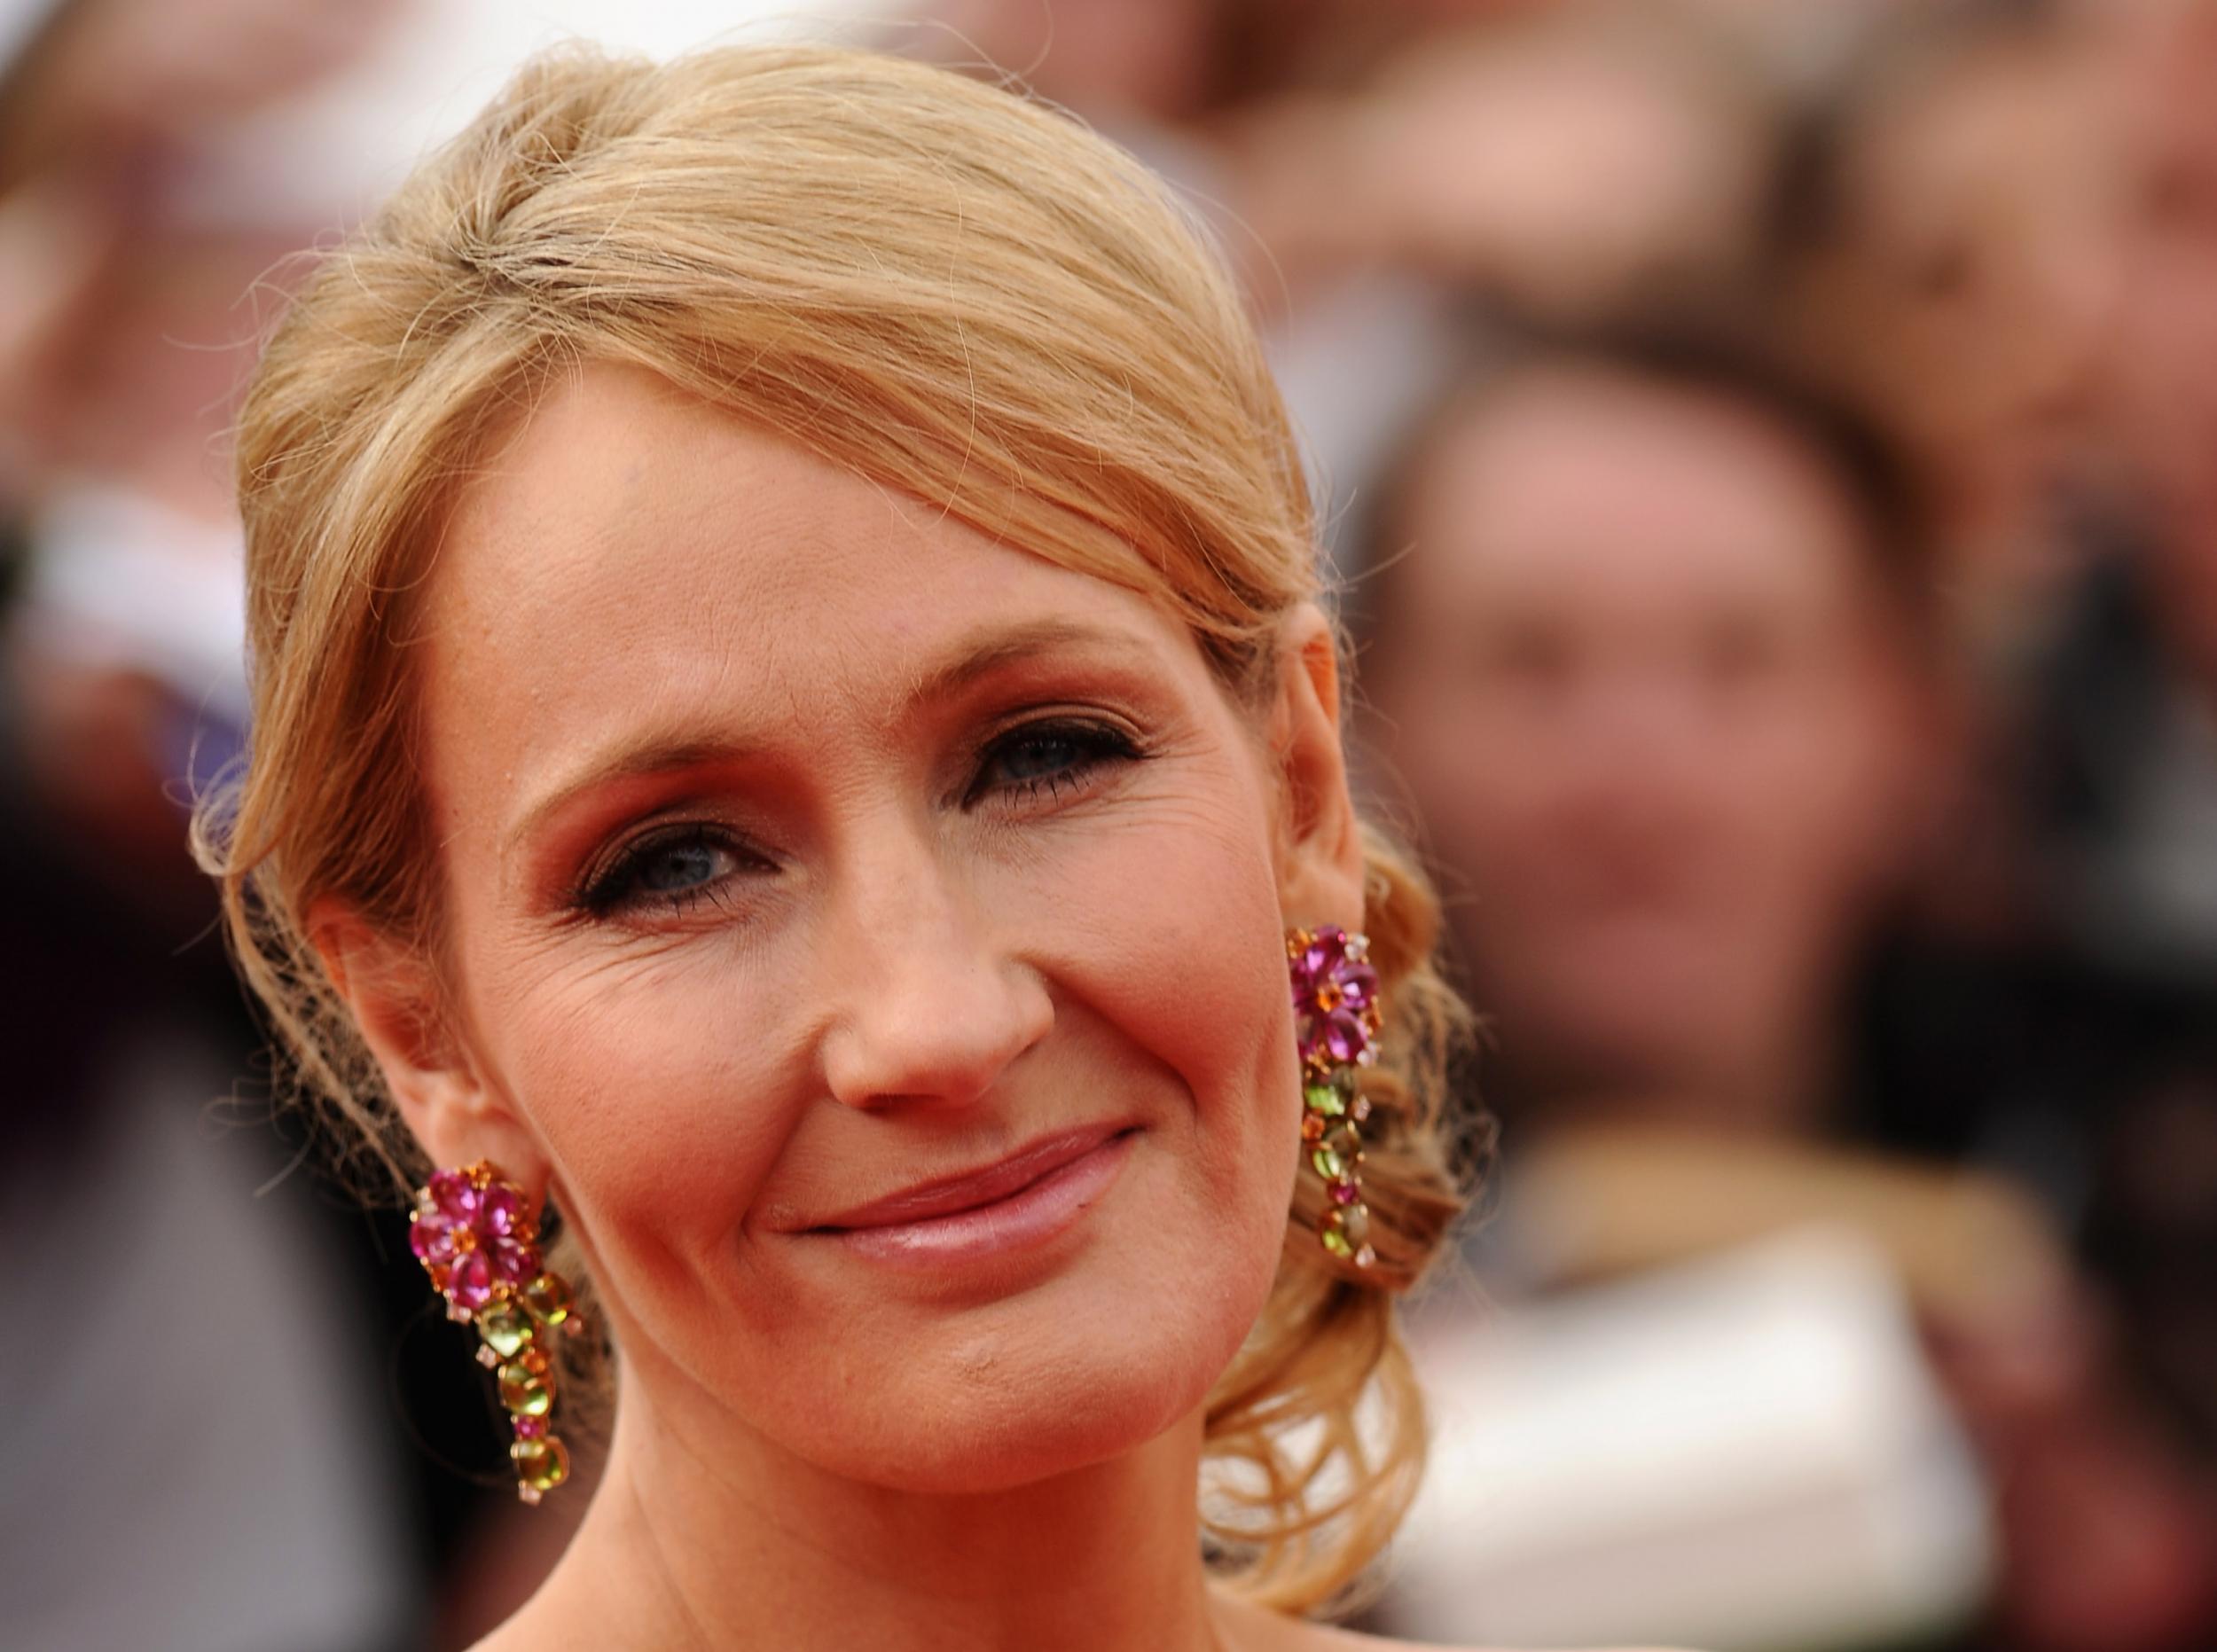 JK Rowling has history of challenging her trolls